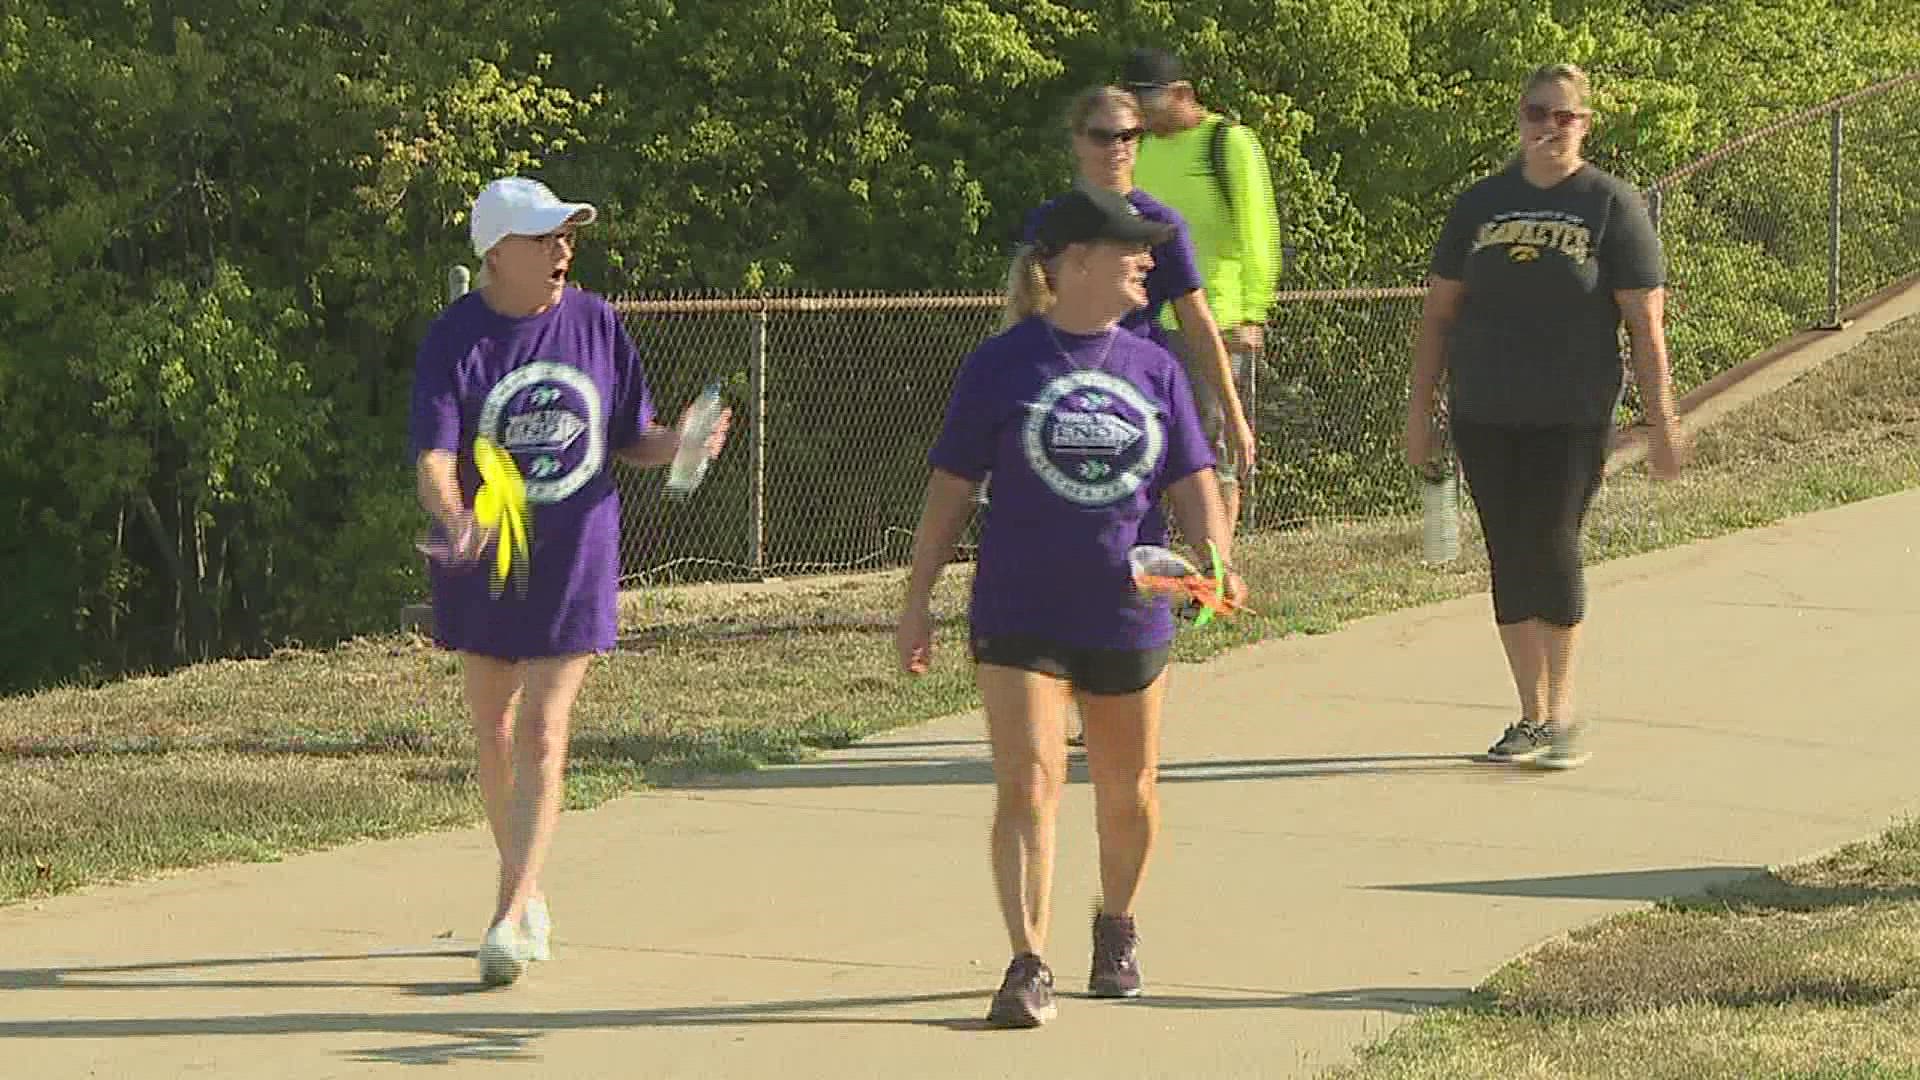 Around 150 people attended the third annual Walk to End Alzheimer's event in Clinton, raising $27,000.